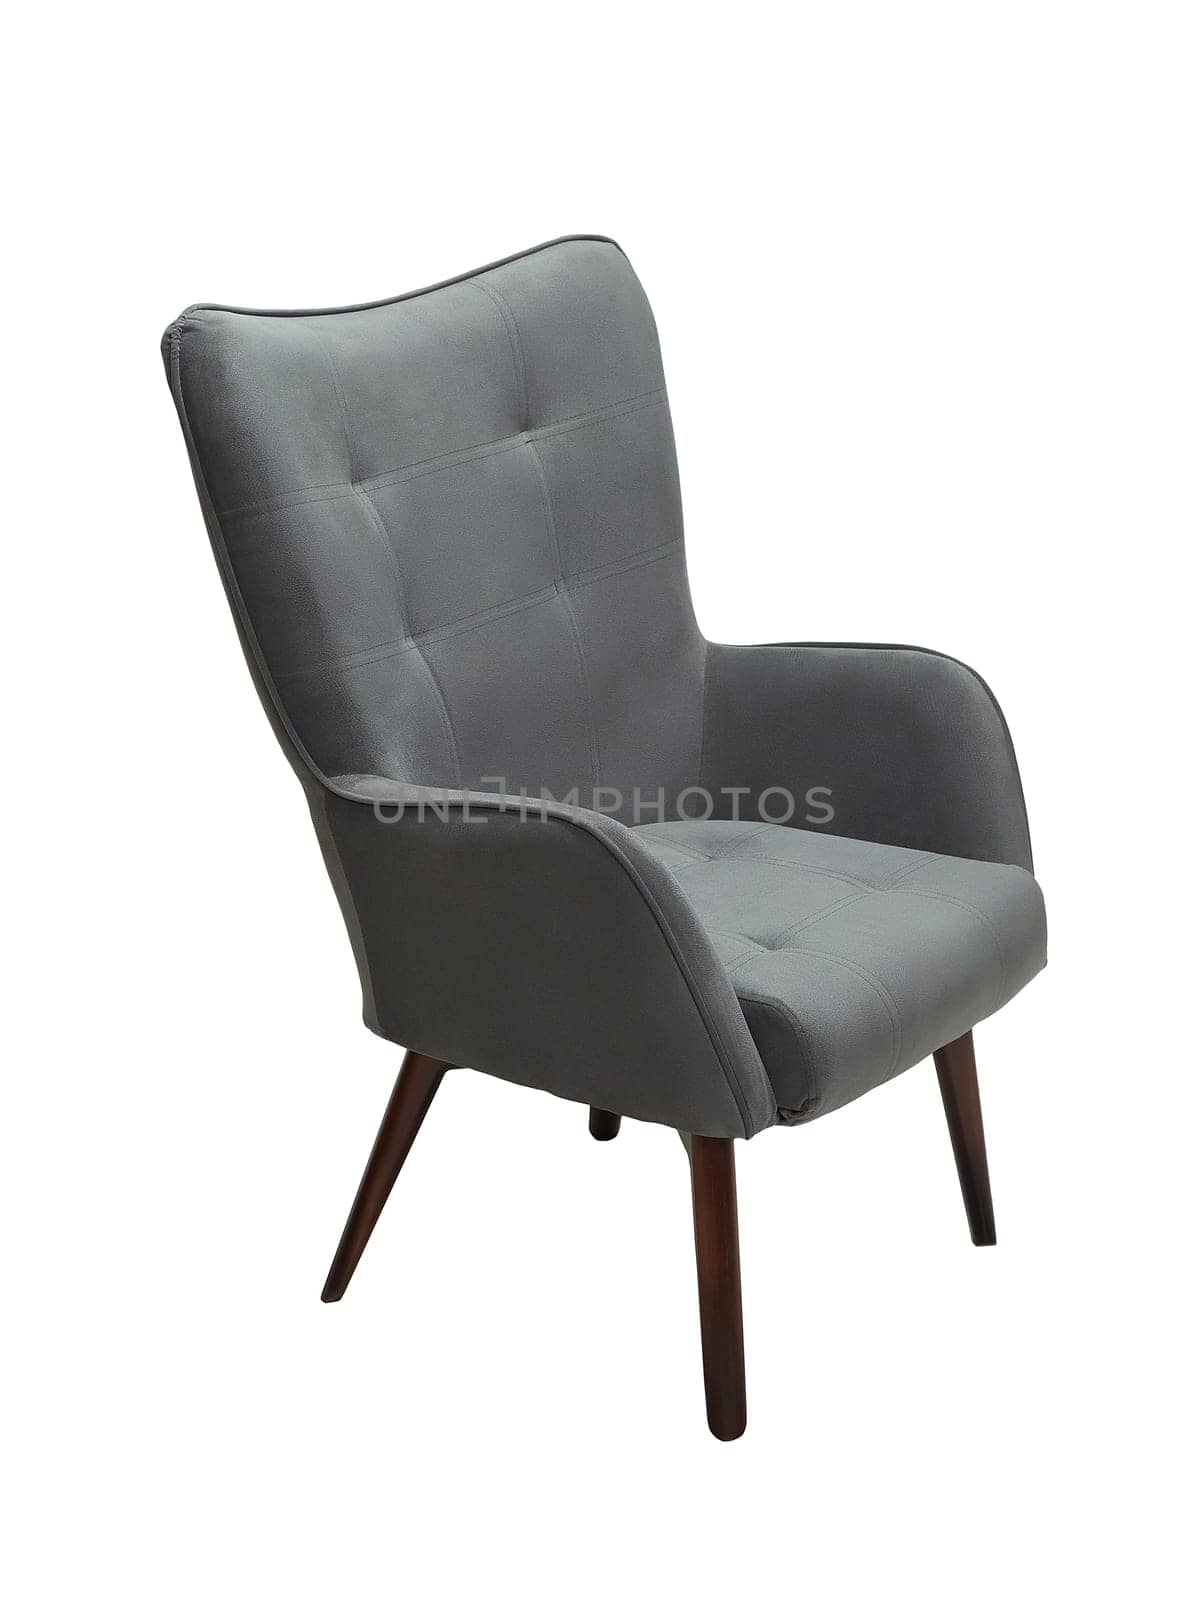 modern gray fabric armchair with wooden legs isolated on white background, side view. by artemzatsepilin